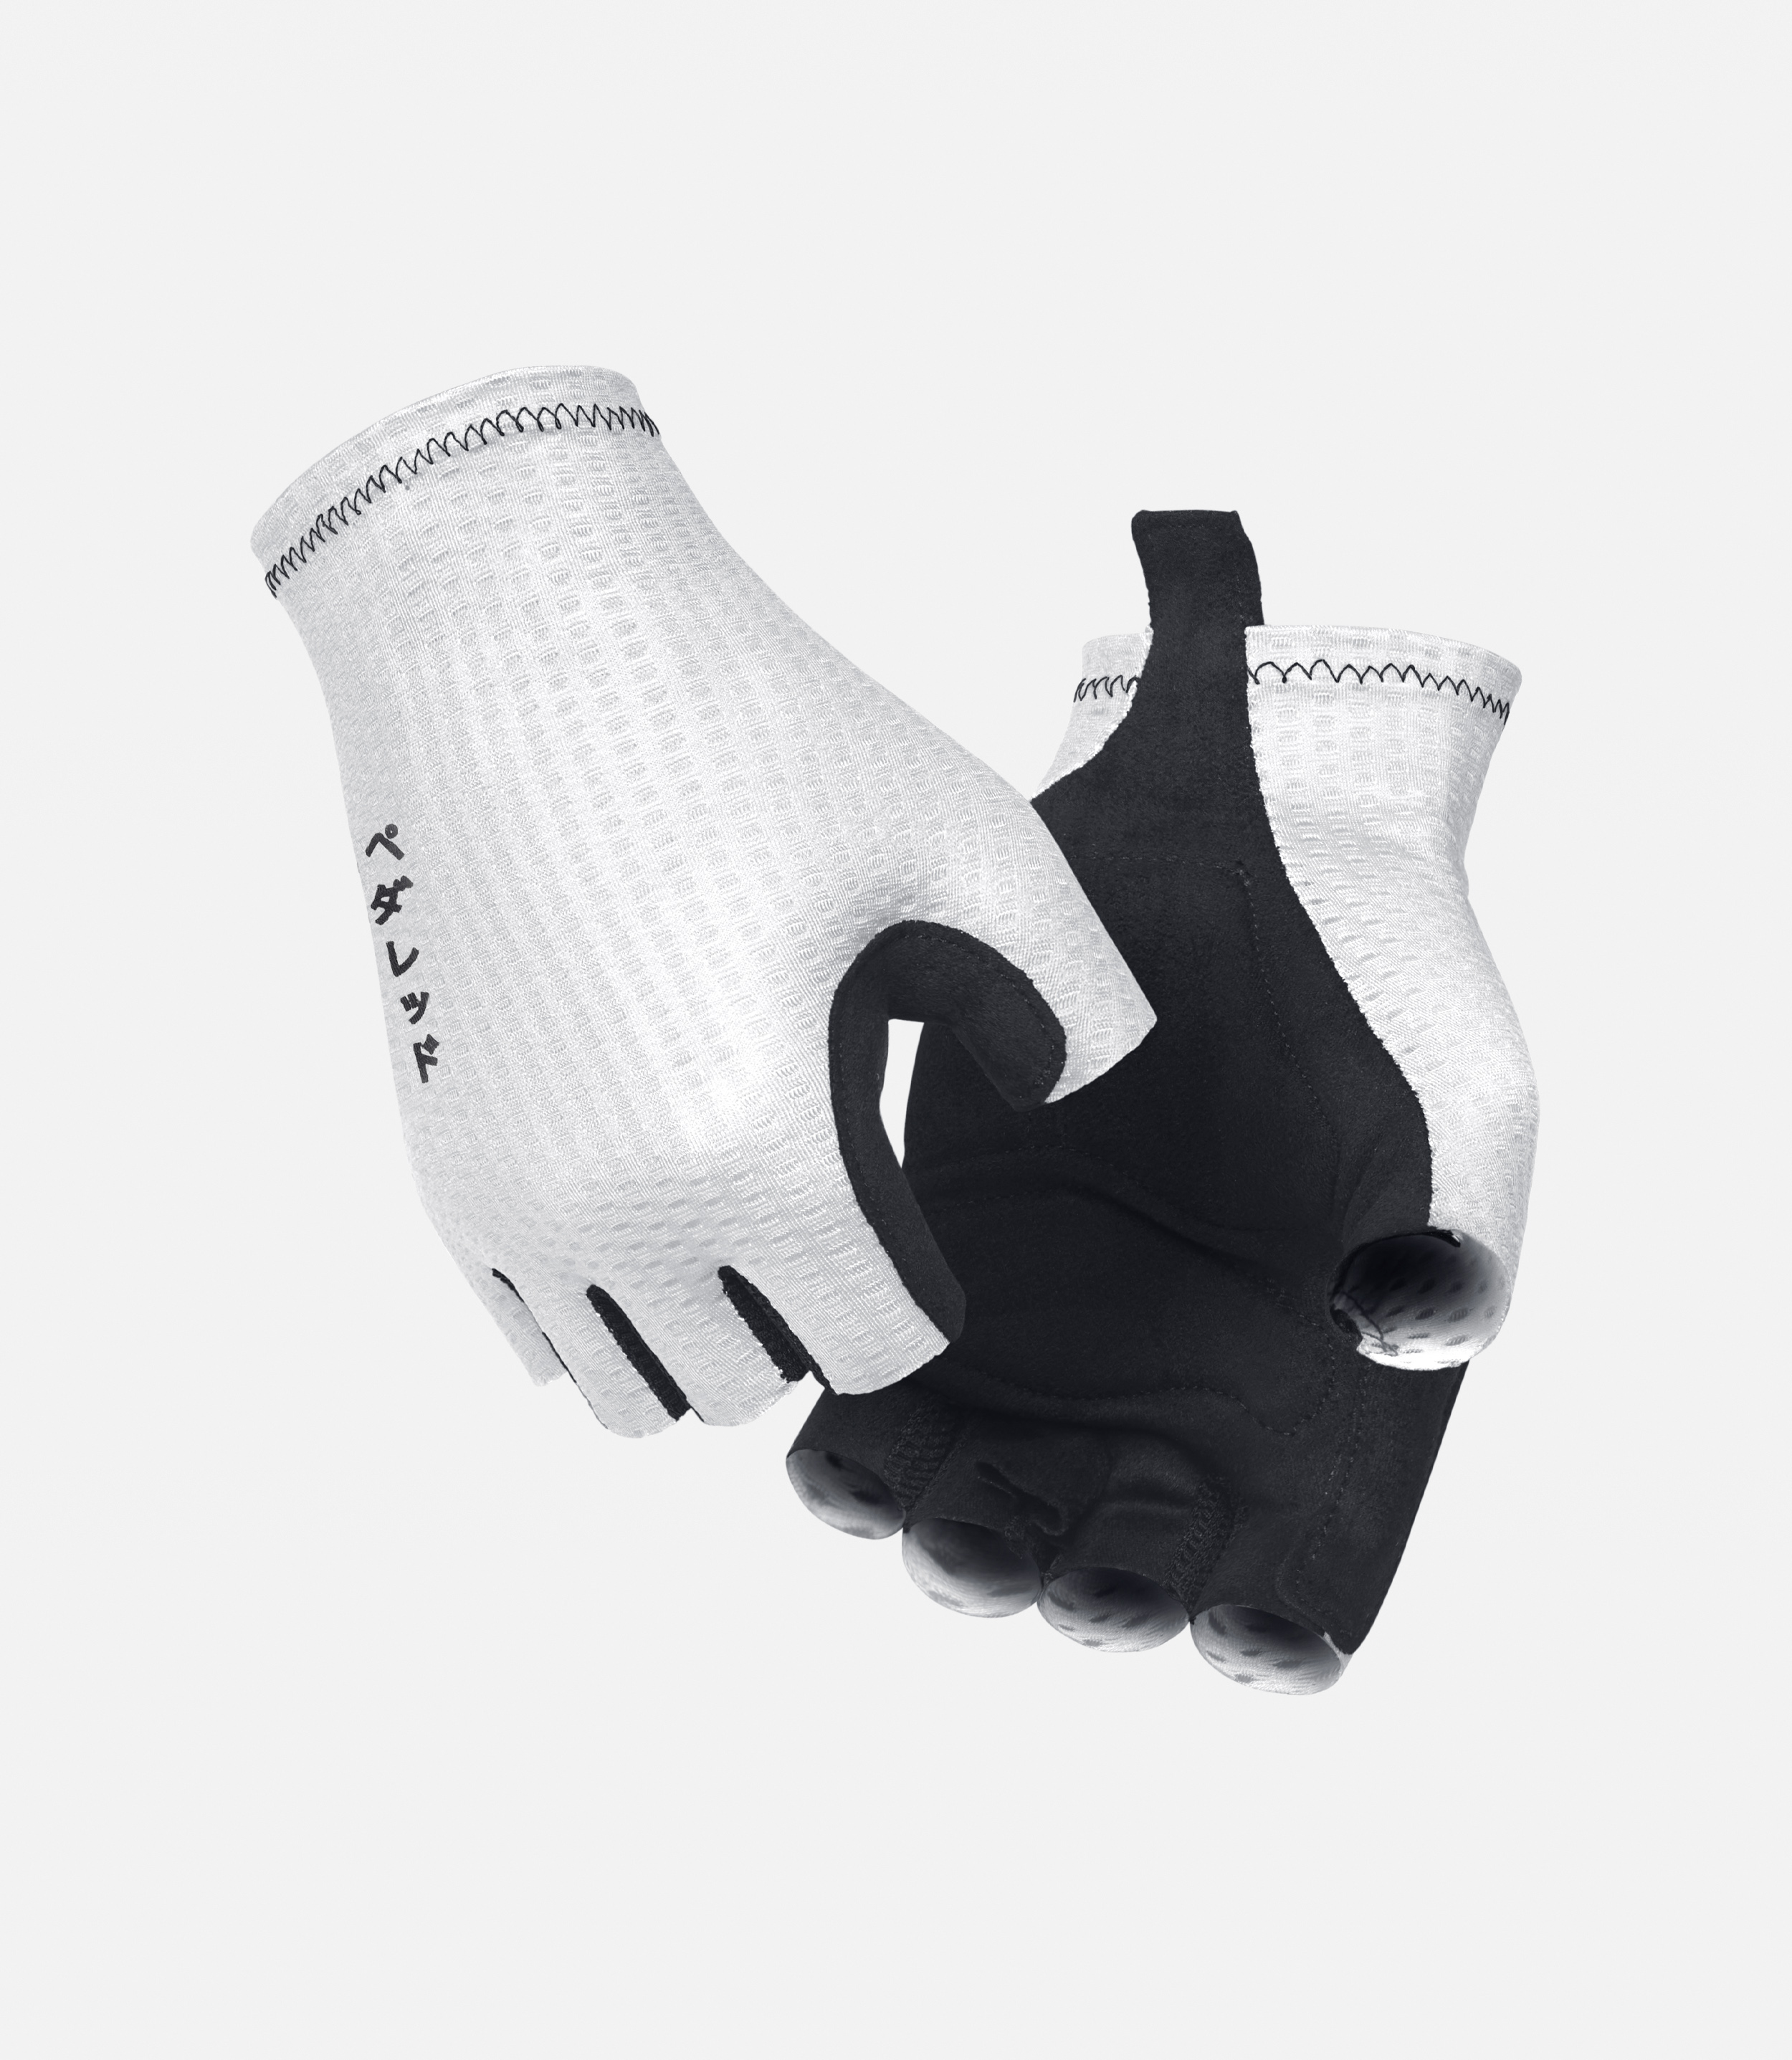 Bike Mitts Essentials: Grip & Comfort for Cyclists!